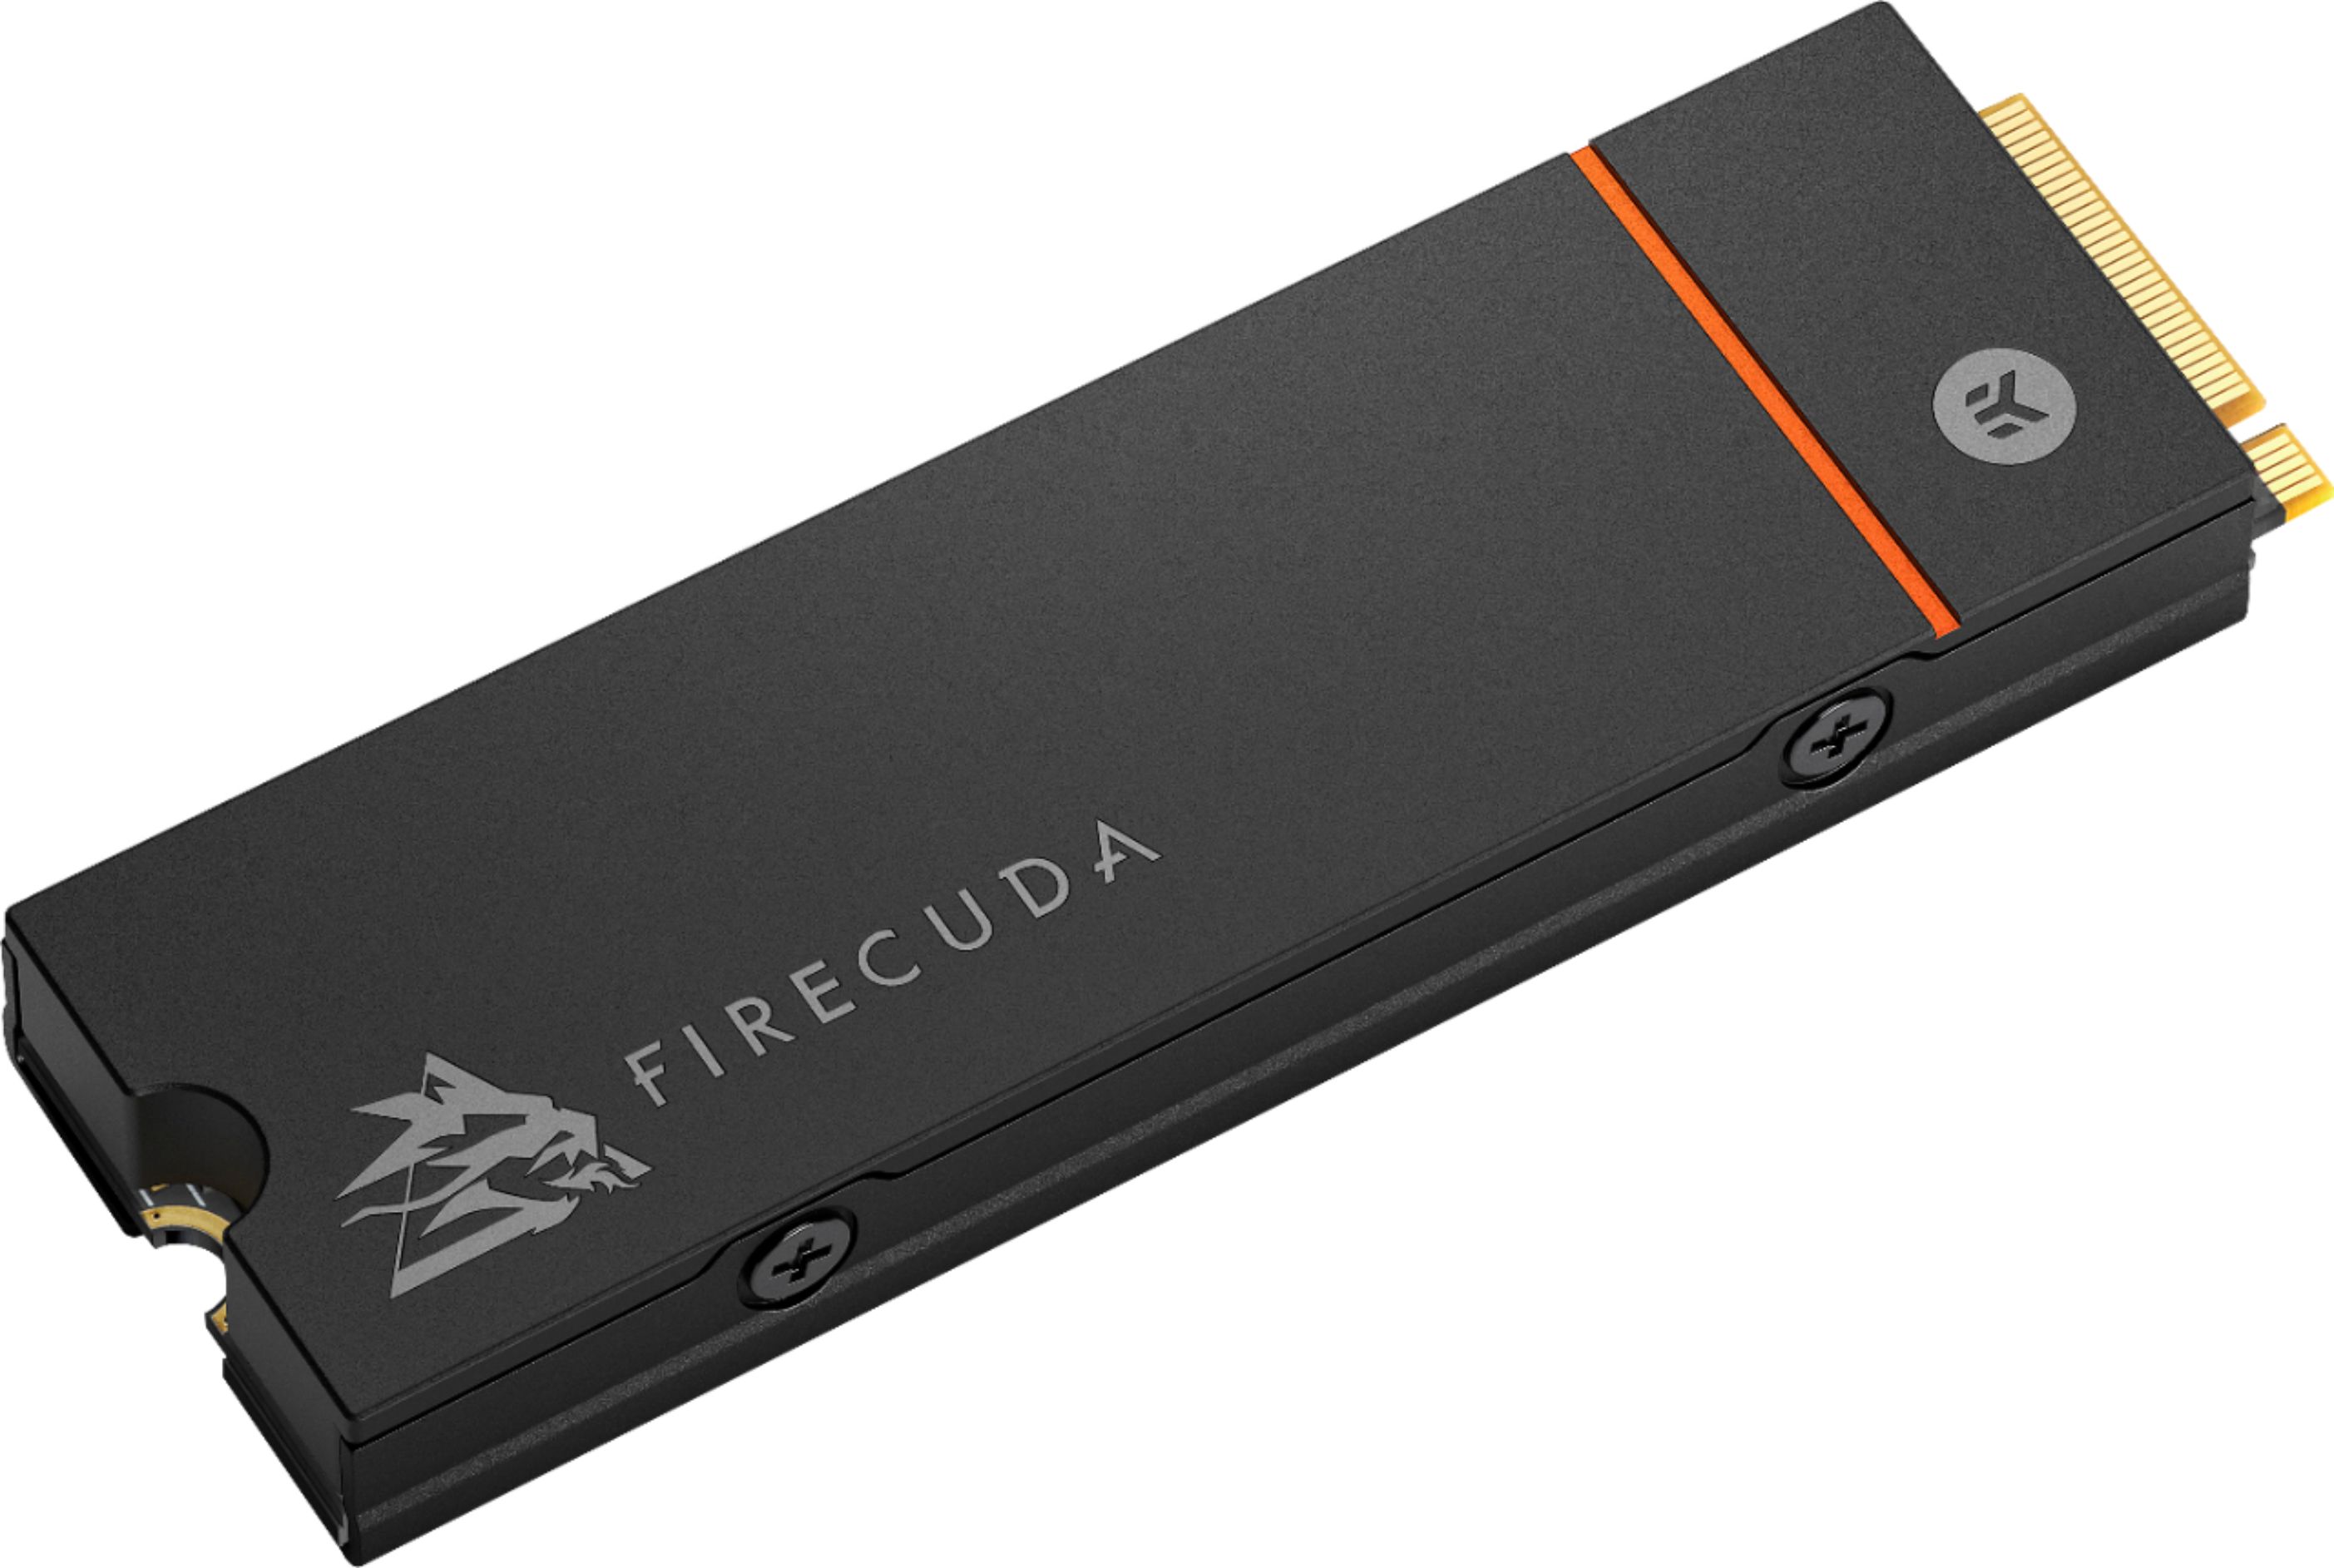 Seagate Firecuda 2TB review: the ultimate PS4 storage upgrade?